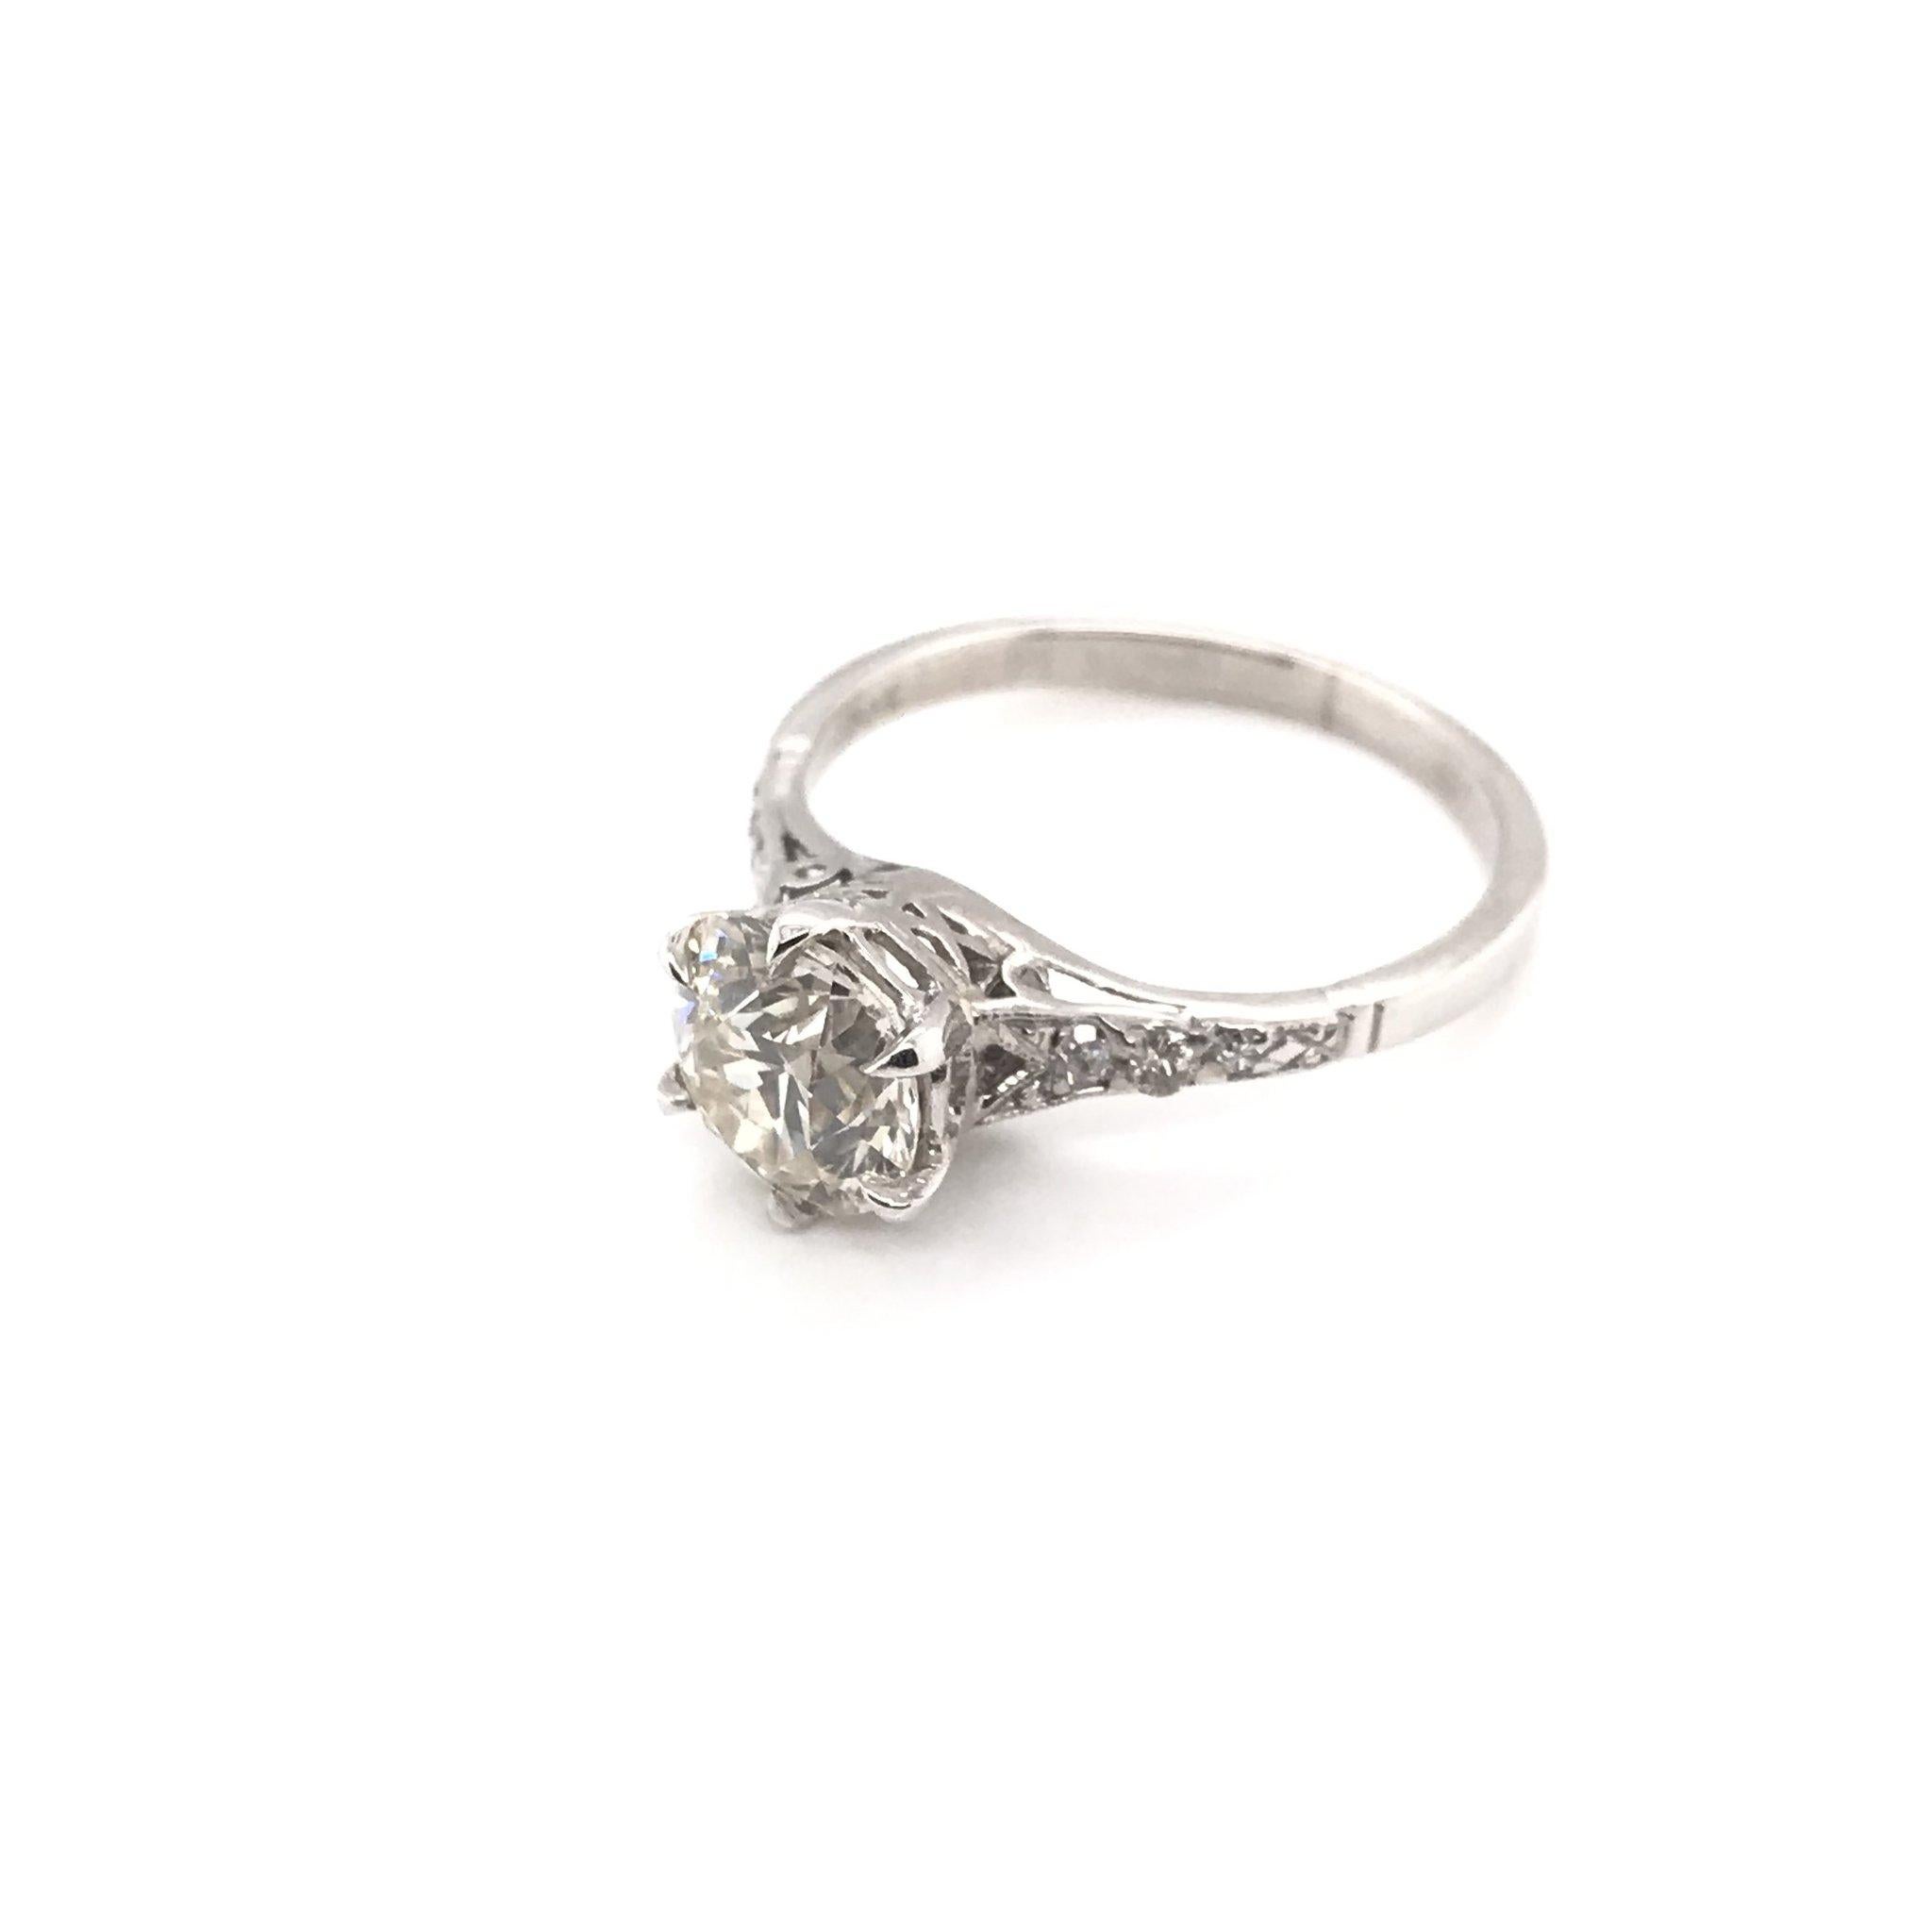 This antique piece was handcrafted sometime during the Art Deco design period ( 1920-1940 ). The platinum solitaire style setting features a beautiful 1.54 carat center diamond. The center diamond grades approximately L in color and VS1 in clarity.